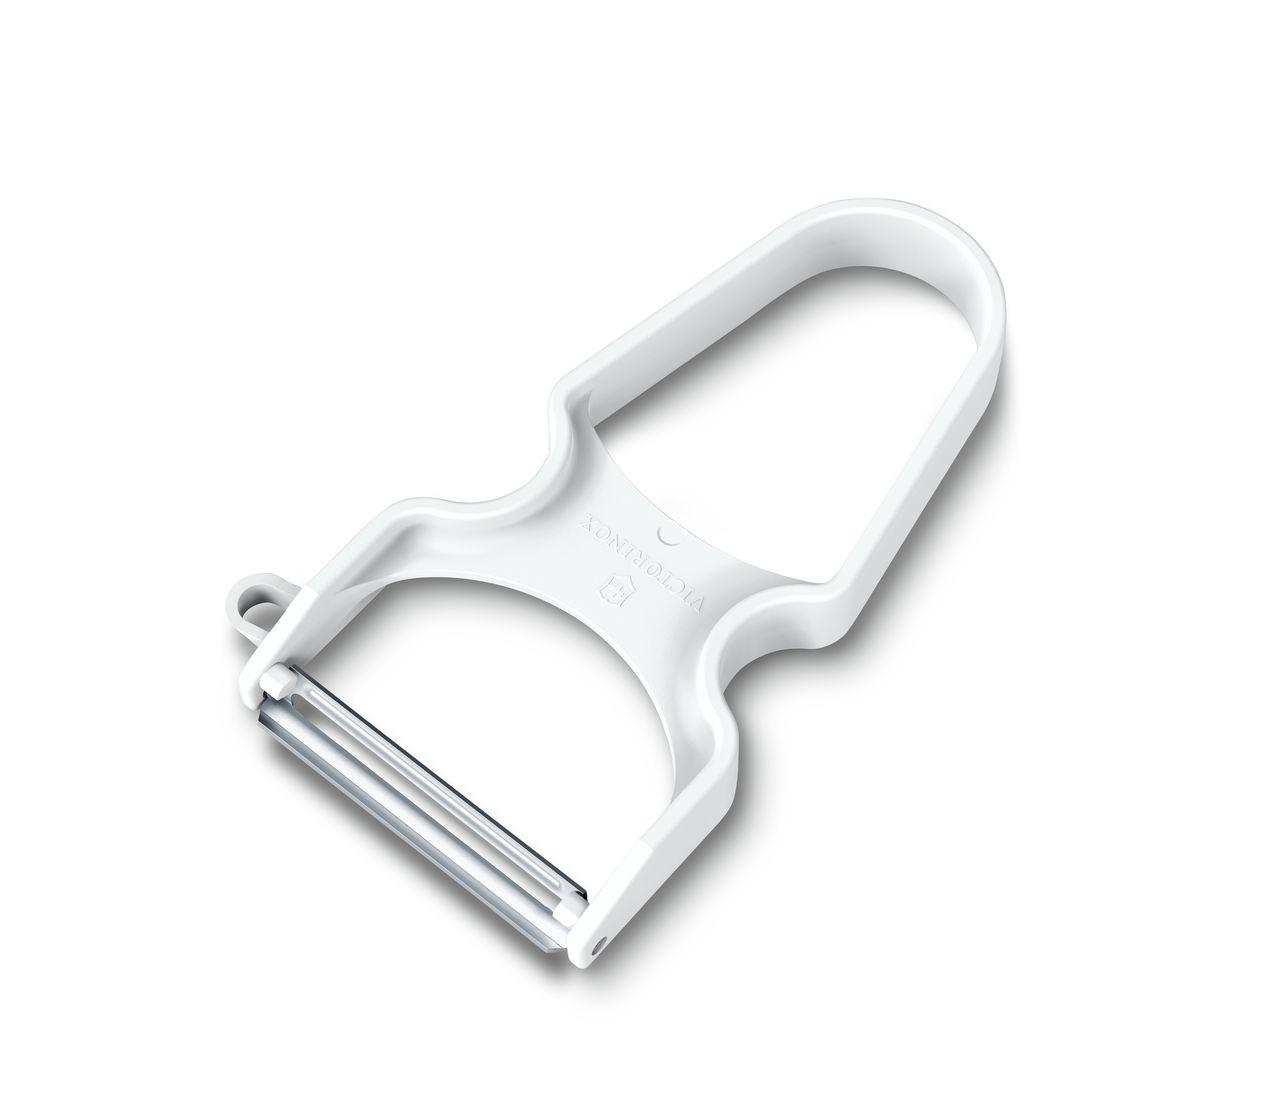 Vogue Speed Peeler Made of Stainless Steel Durable with Straight Edge